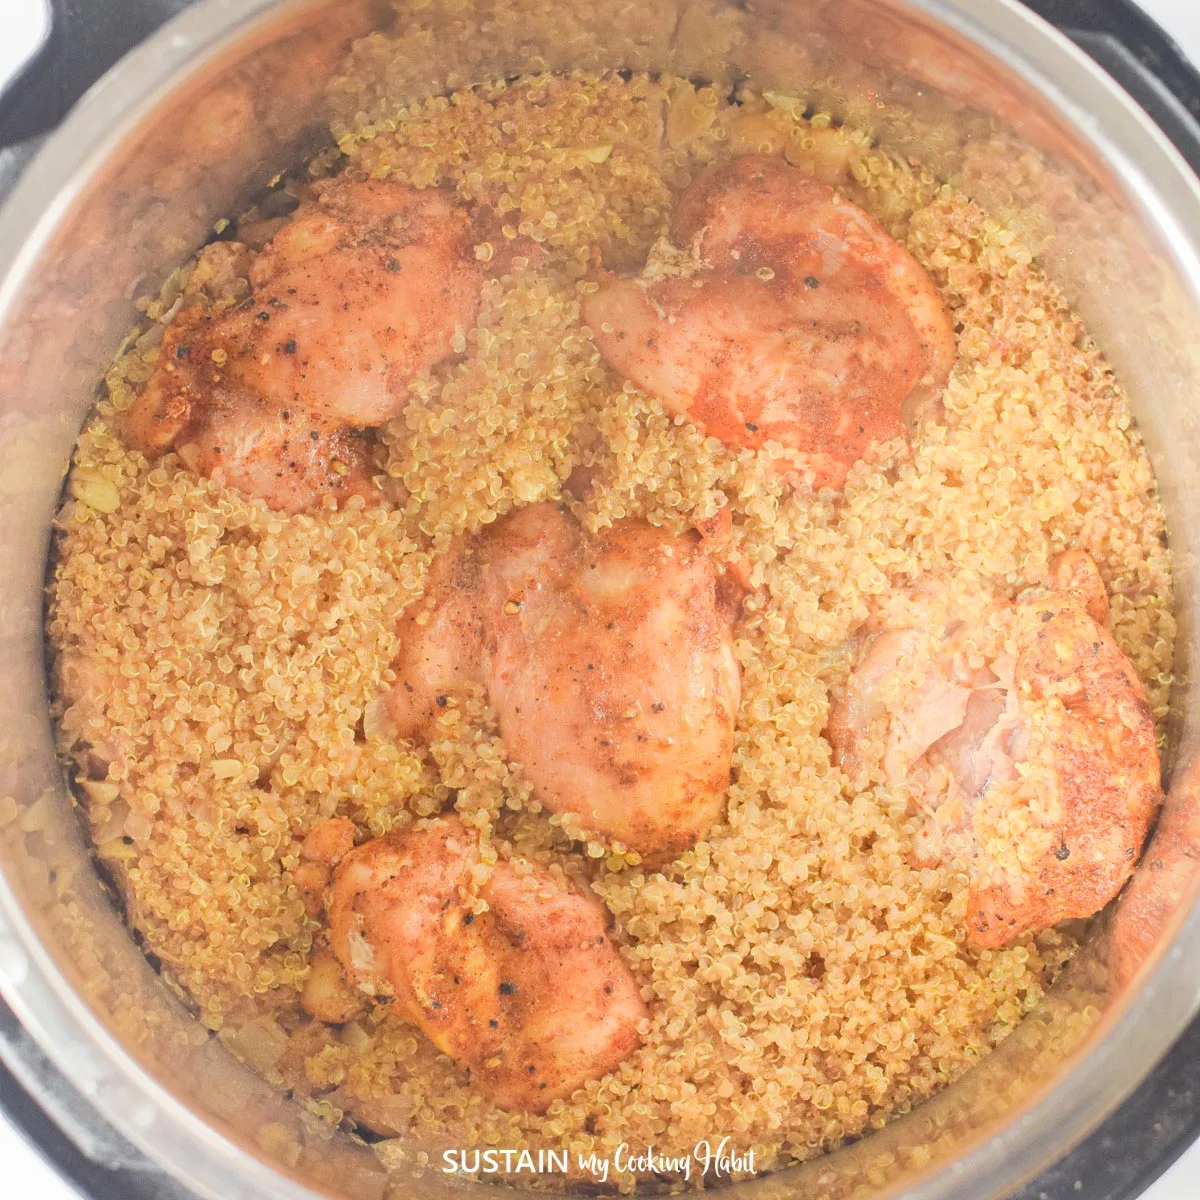 Cooked chicken and quinoa.